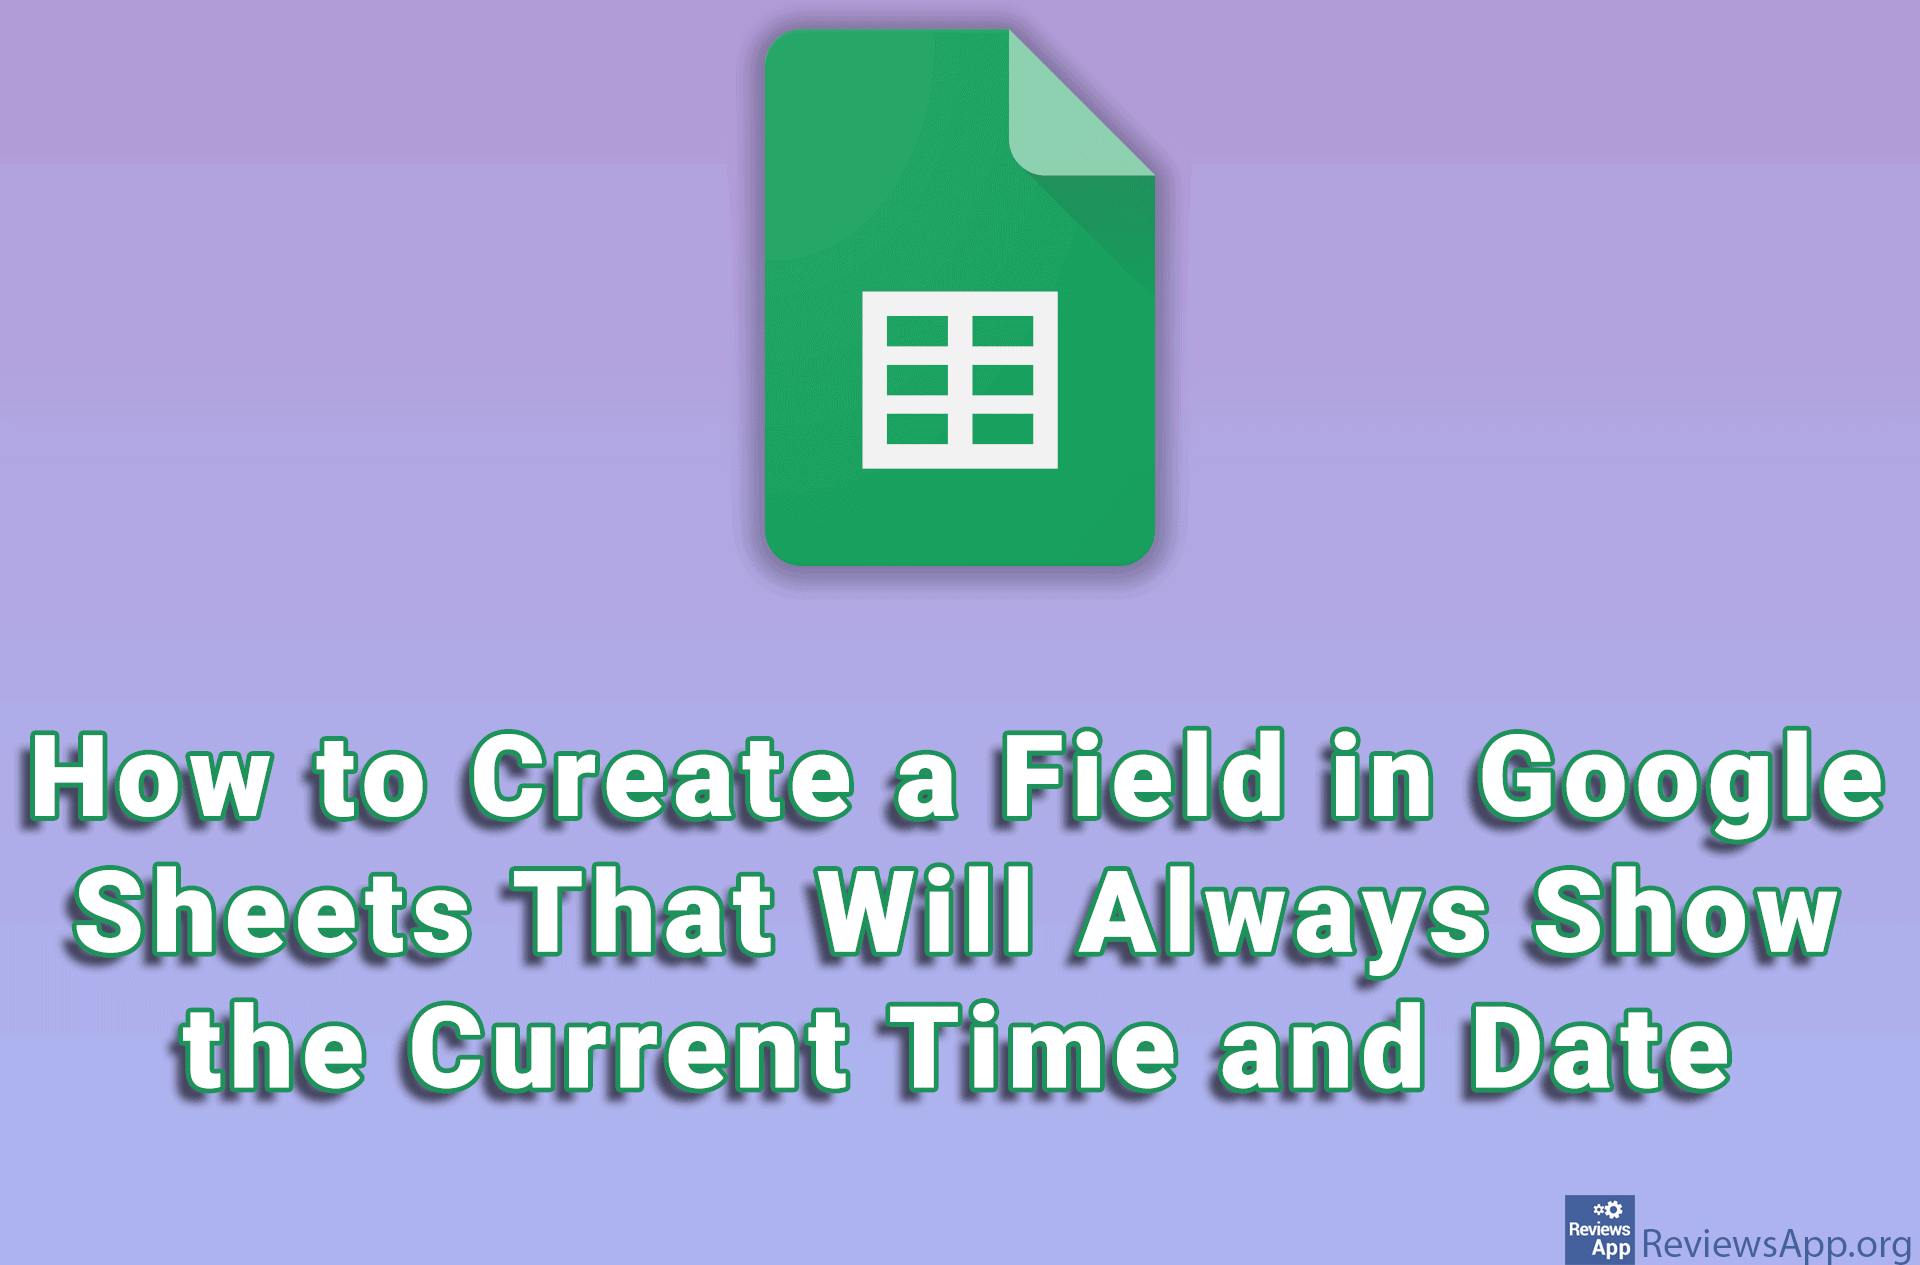 How to Create a Field in Google Sheets That Will Always Show the Current Time and Date